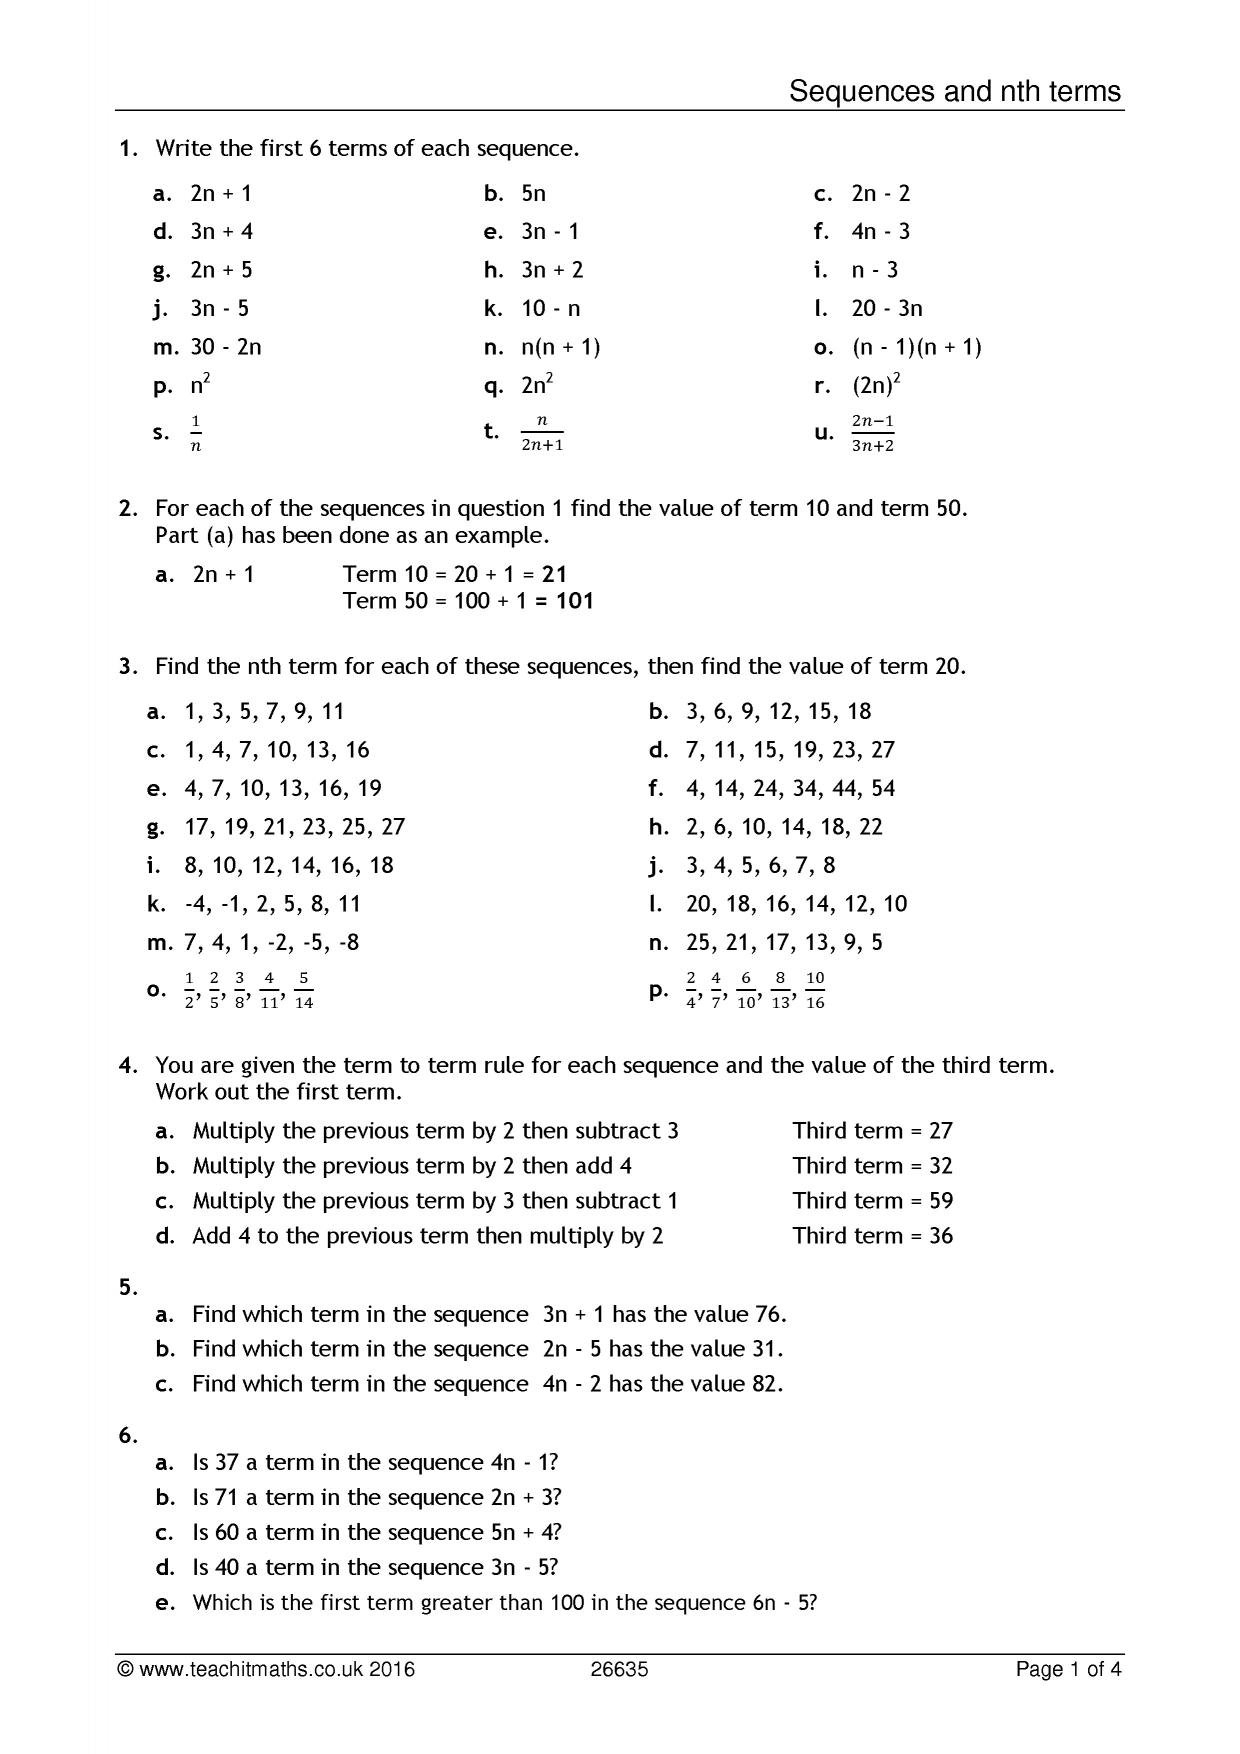 Sequences And Nth Terms Worksheet Pdf  Teachit Maths With Picture Sequencing Worksheets